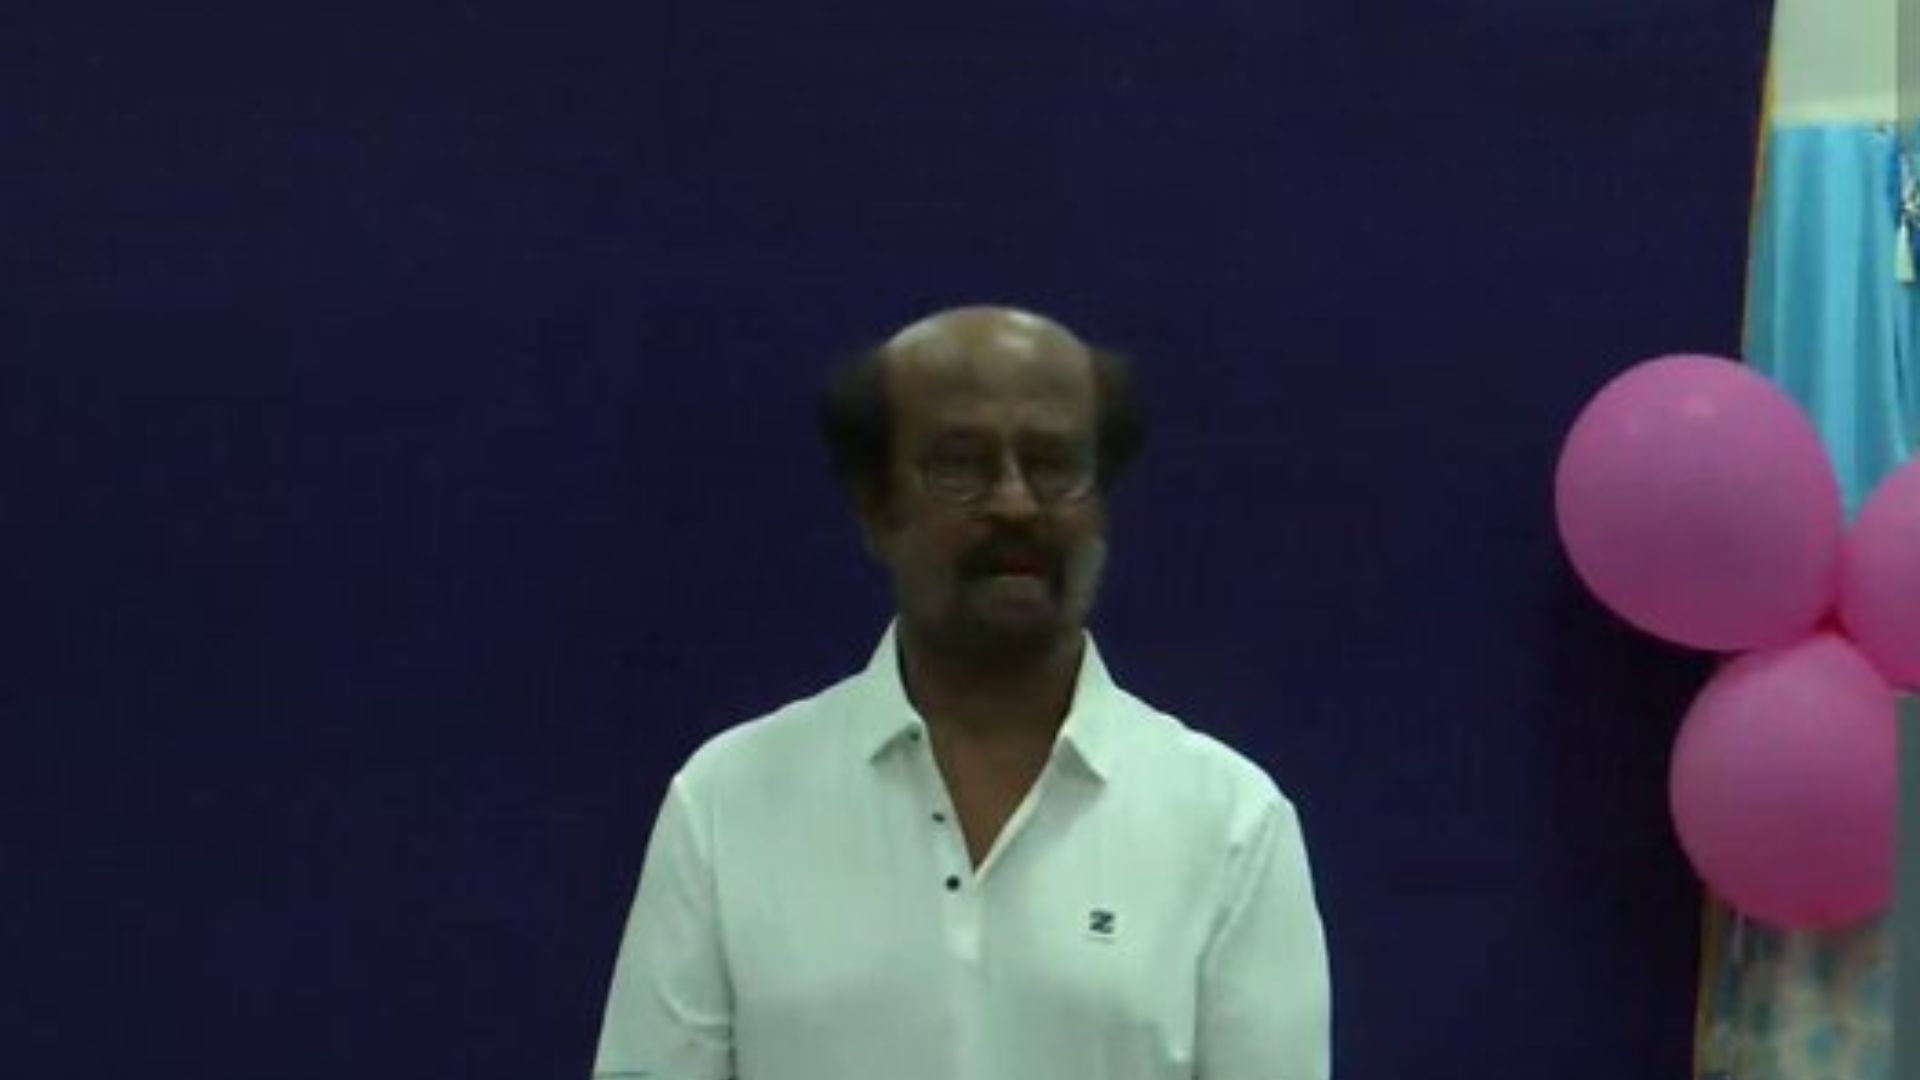 Actor Rajnikanth casts his vote at polling booth in Chennai